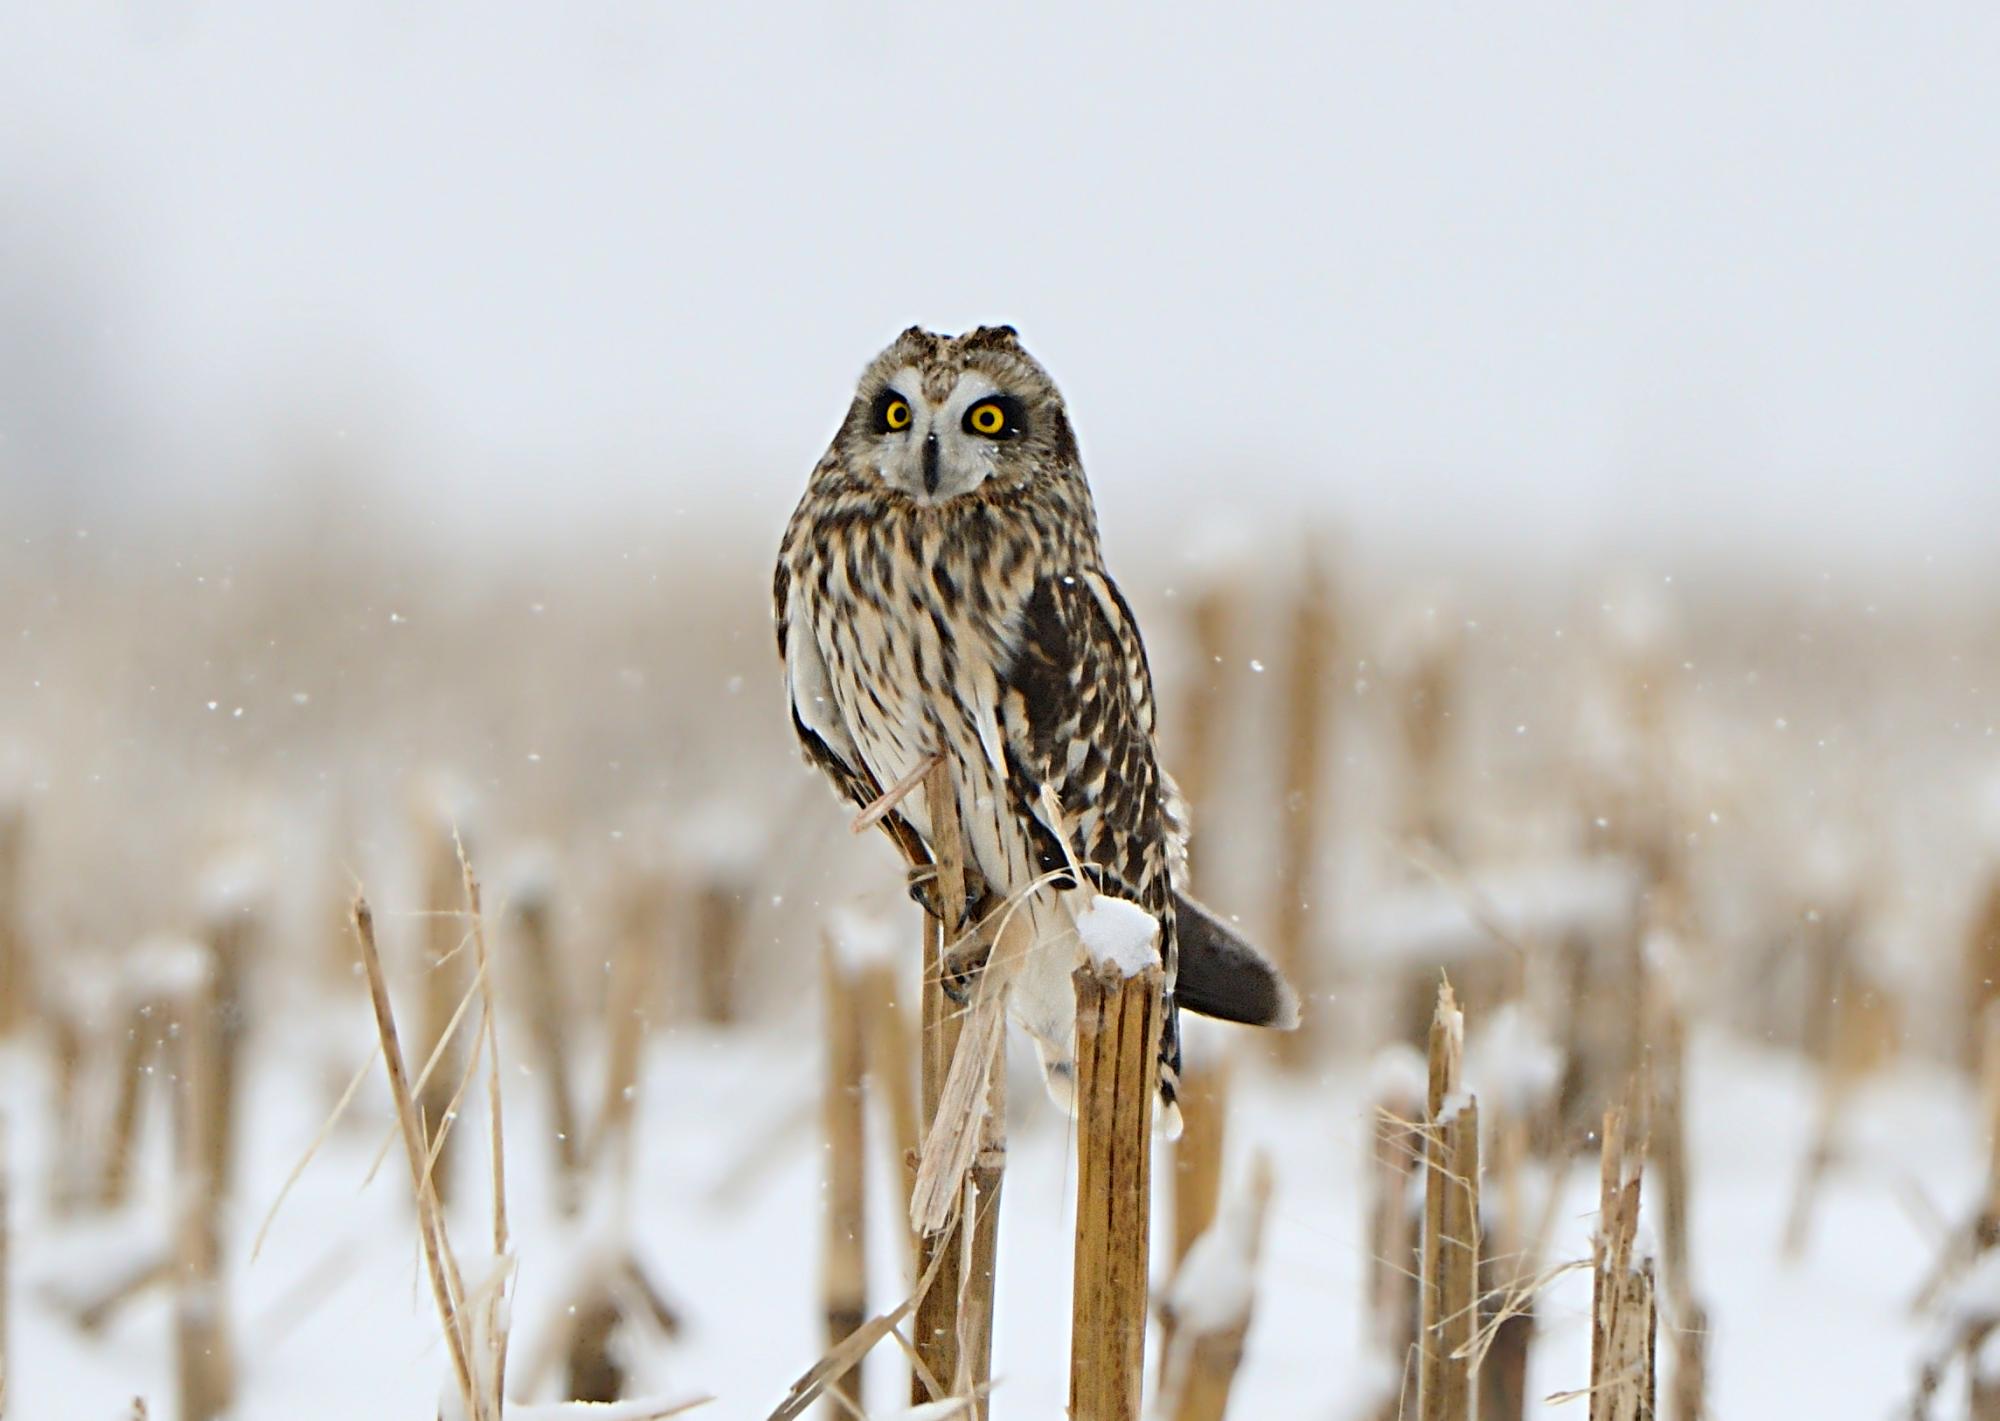 The short-eared owl migrates seasonally throughout its range, which includes every continent except Australia and Antarctica. | Photo by Dave Inman.